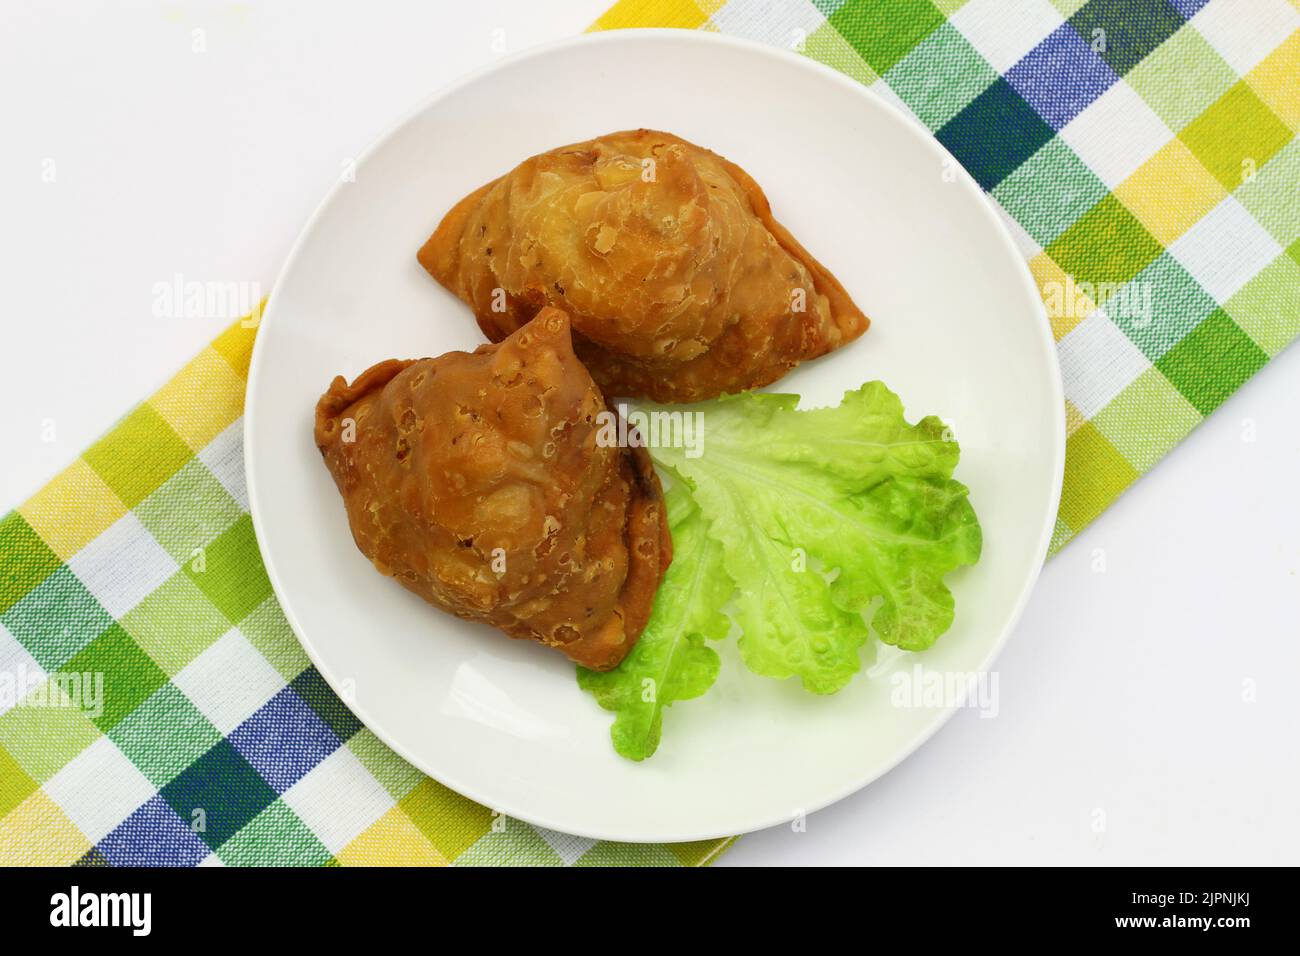 Two Indian samosas on green lettuce on white plate on checkered cloth Stock Photo